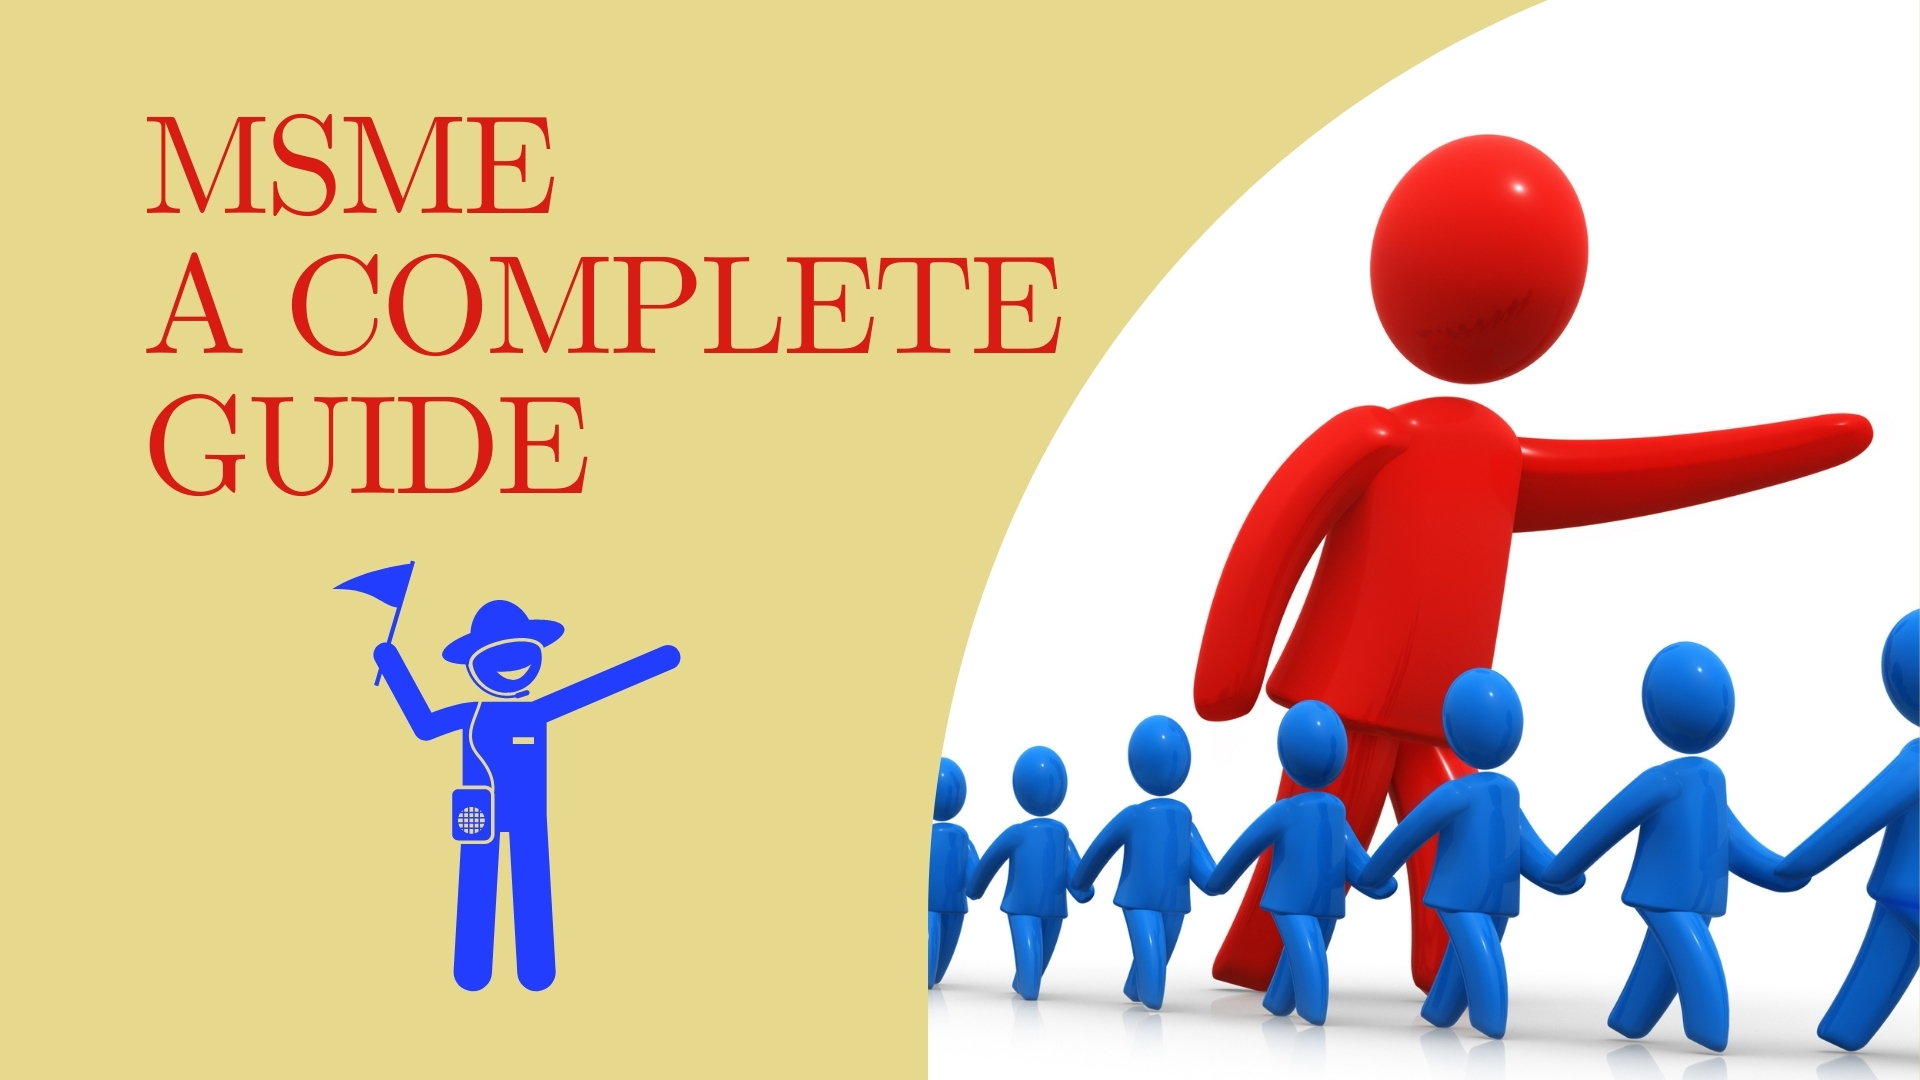 MSME- A COMPLETE GUIDE